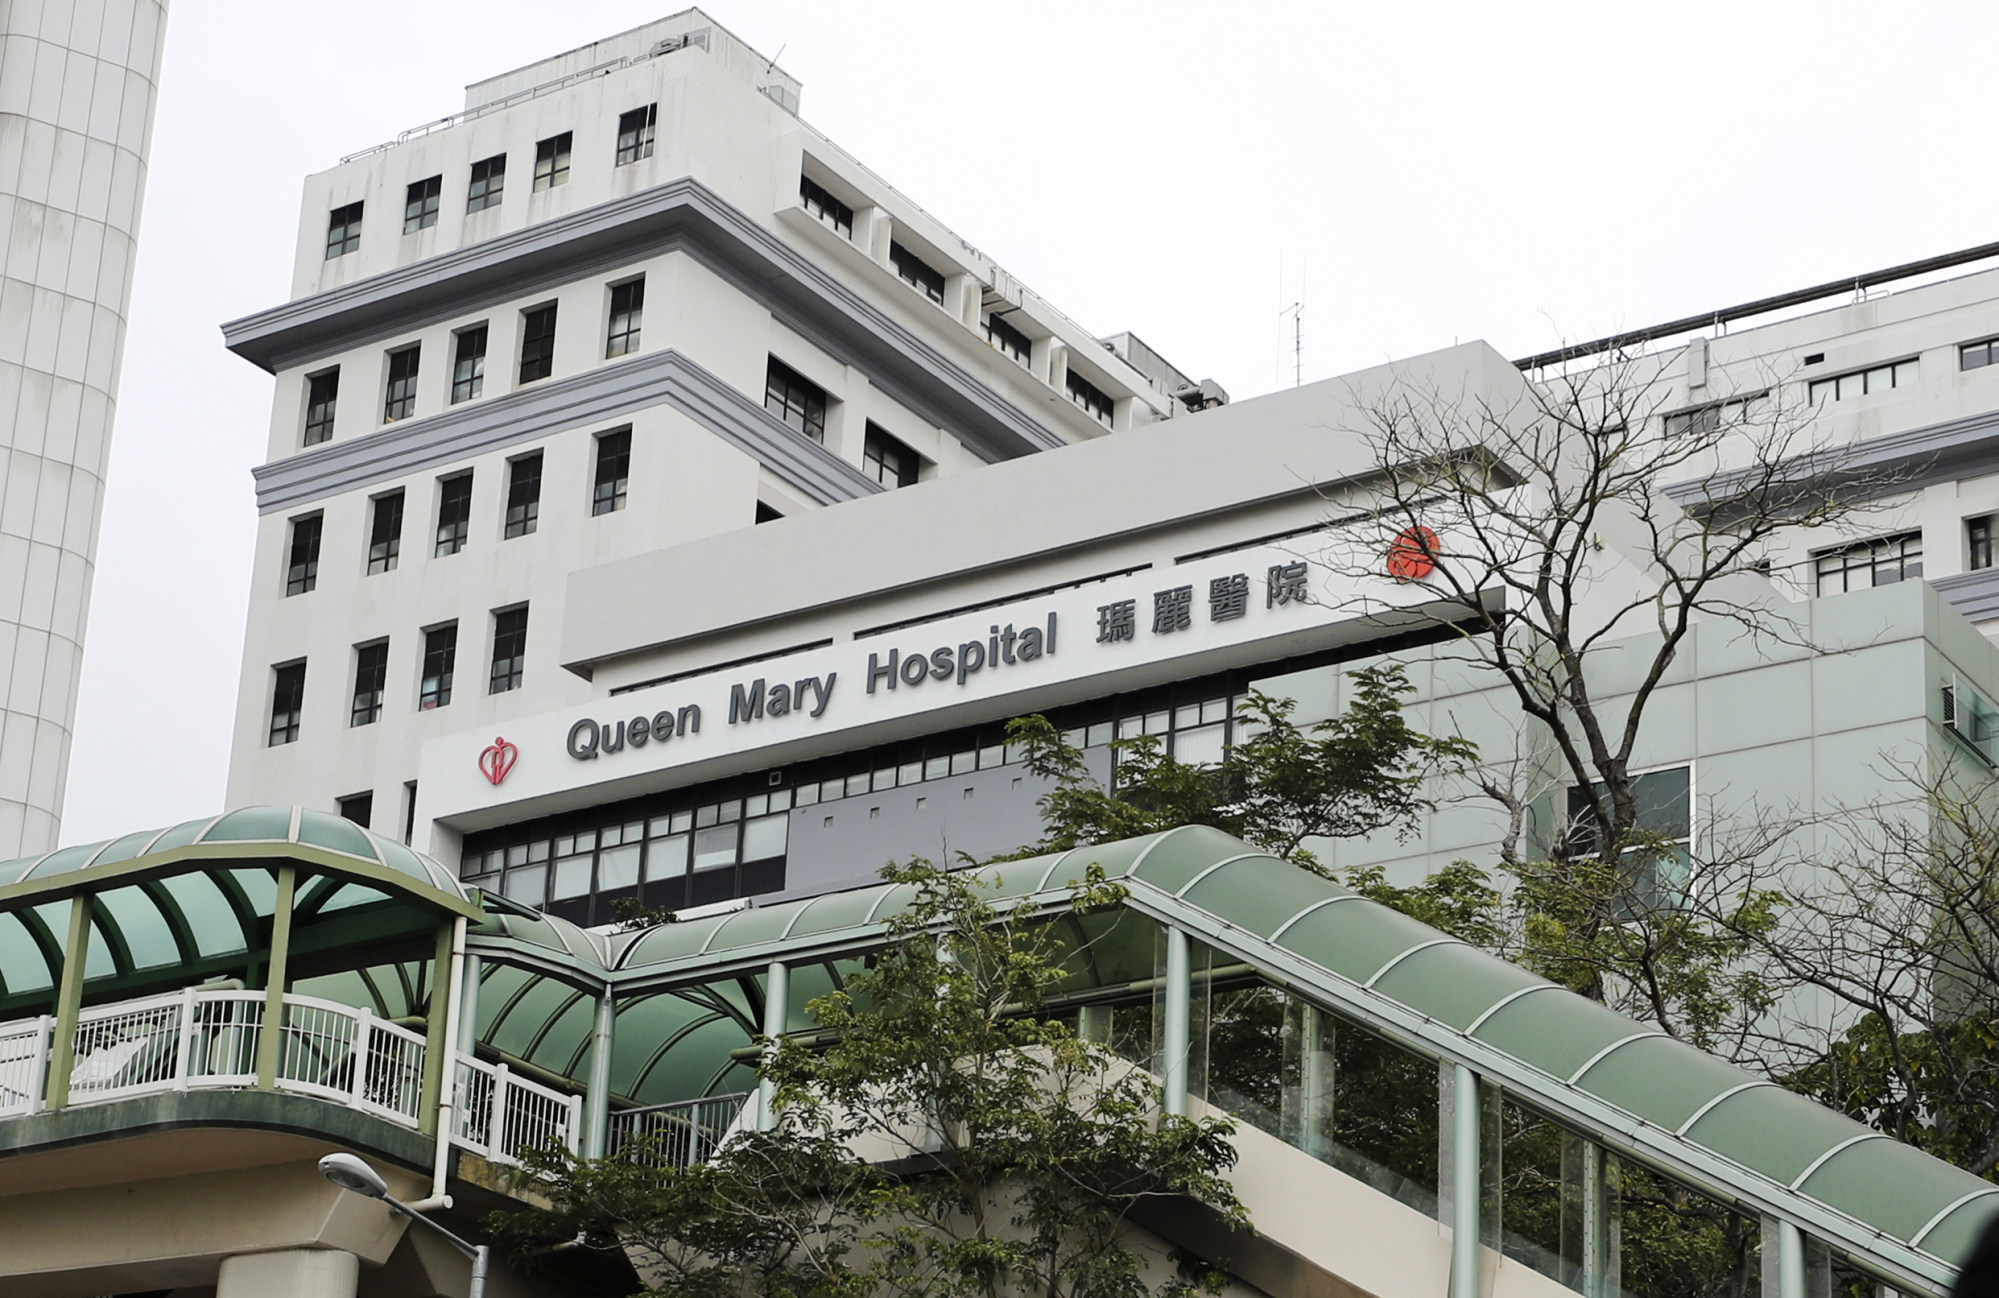 The patient is being treated at Queen Mary Hospital in Pok Fu Lam. Photo: Winson Wong